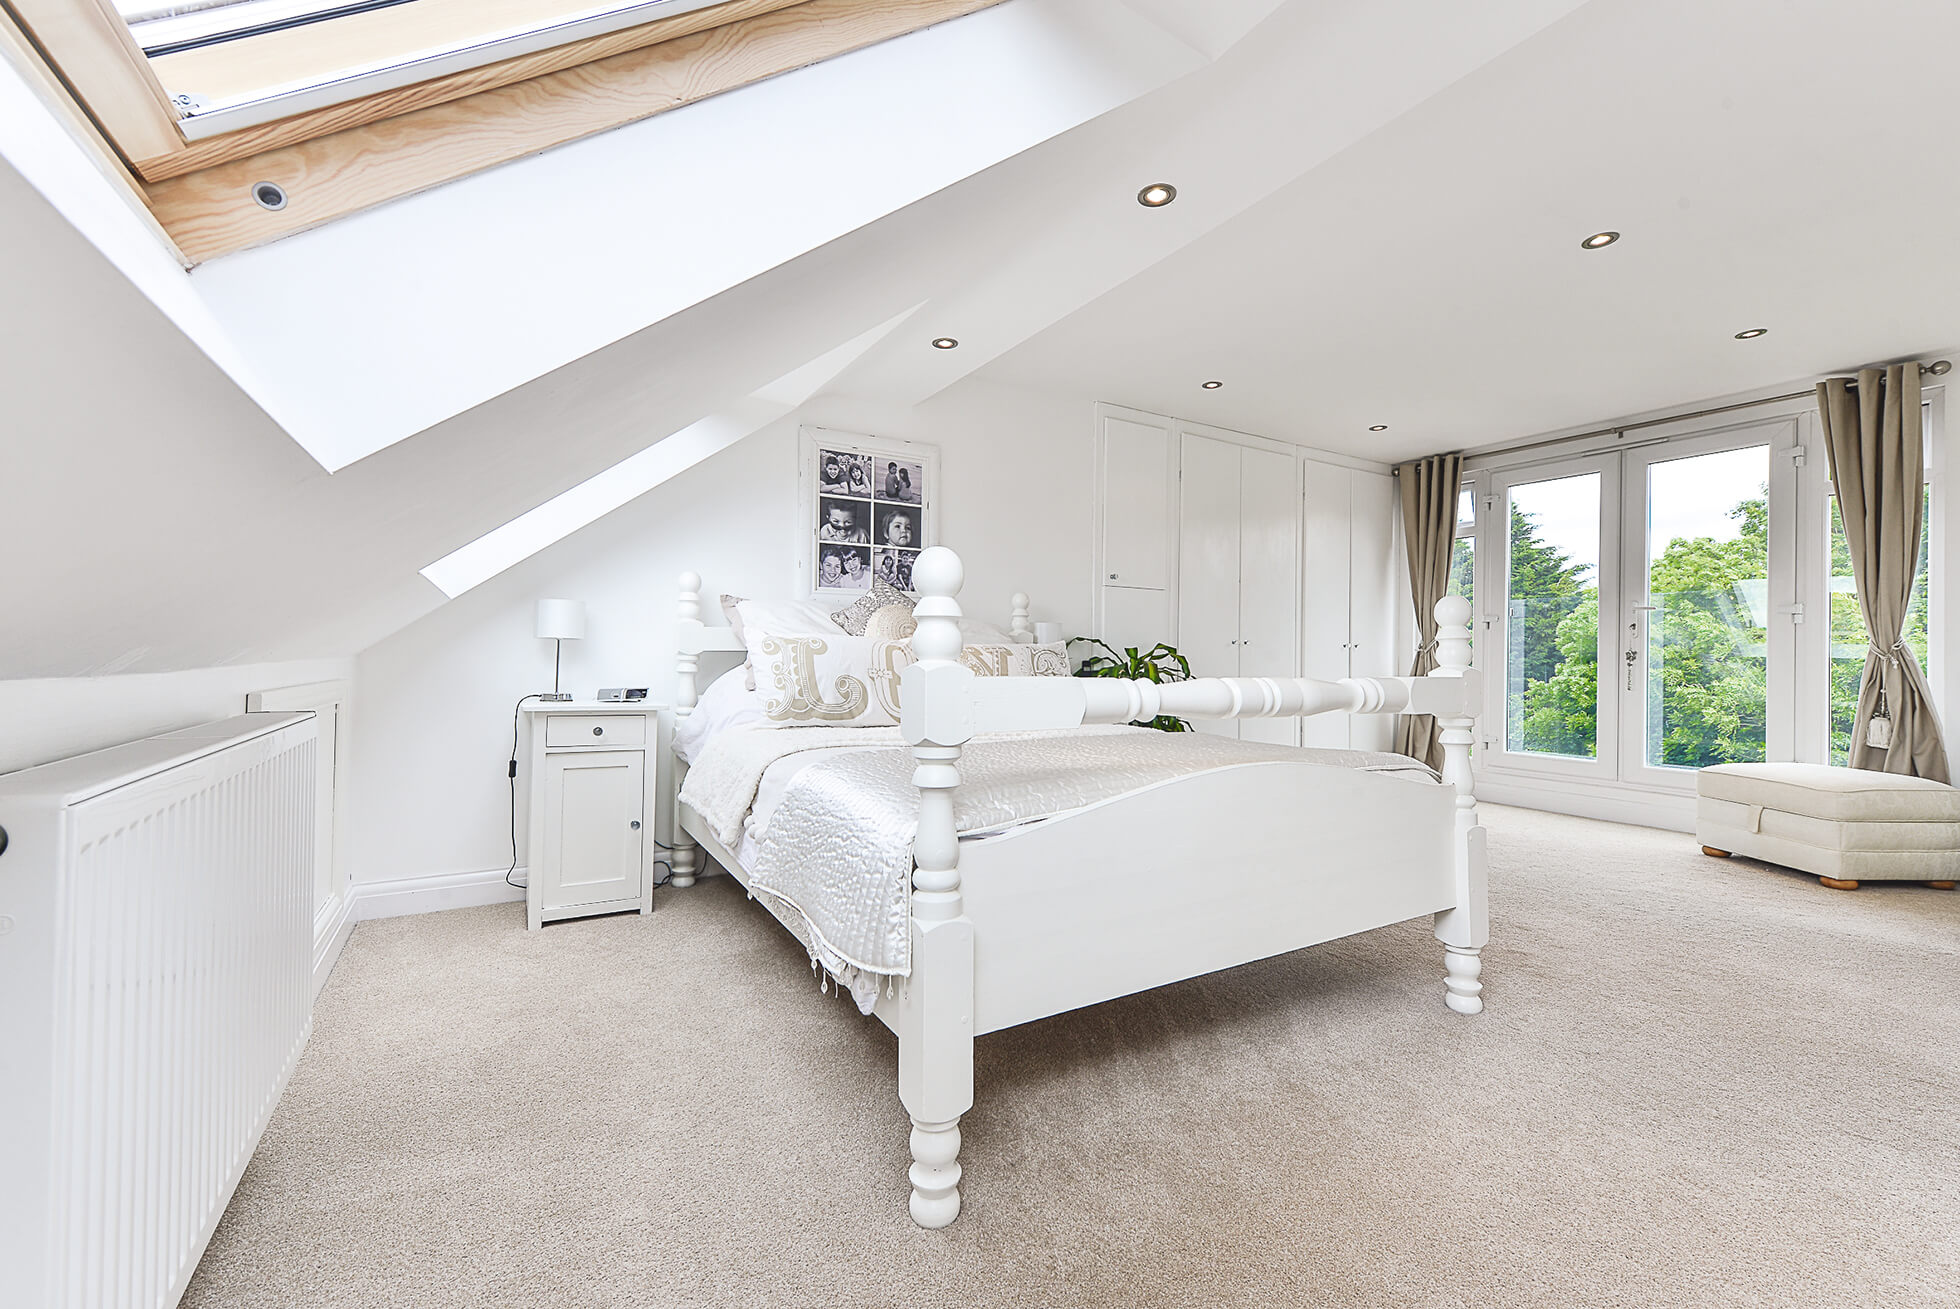 Do you have a question about converting your Loft in Little Hadham? Here are the most popular questions asked by our clients.